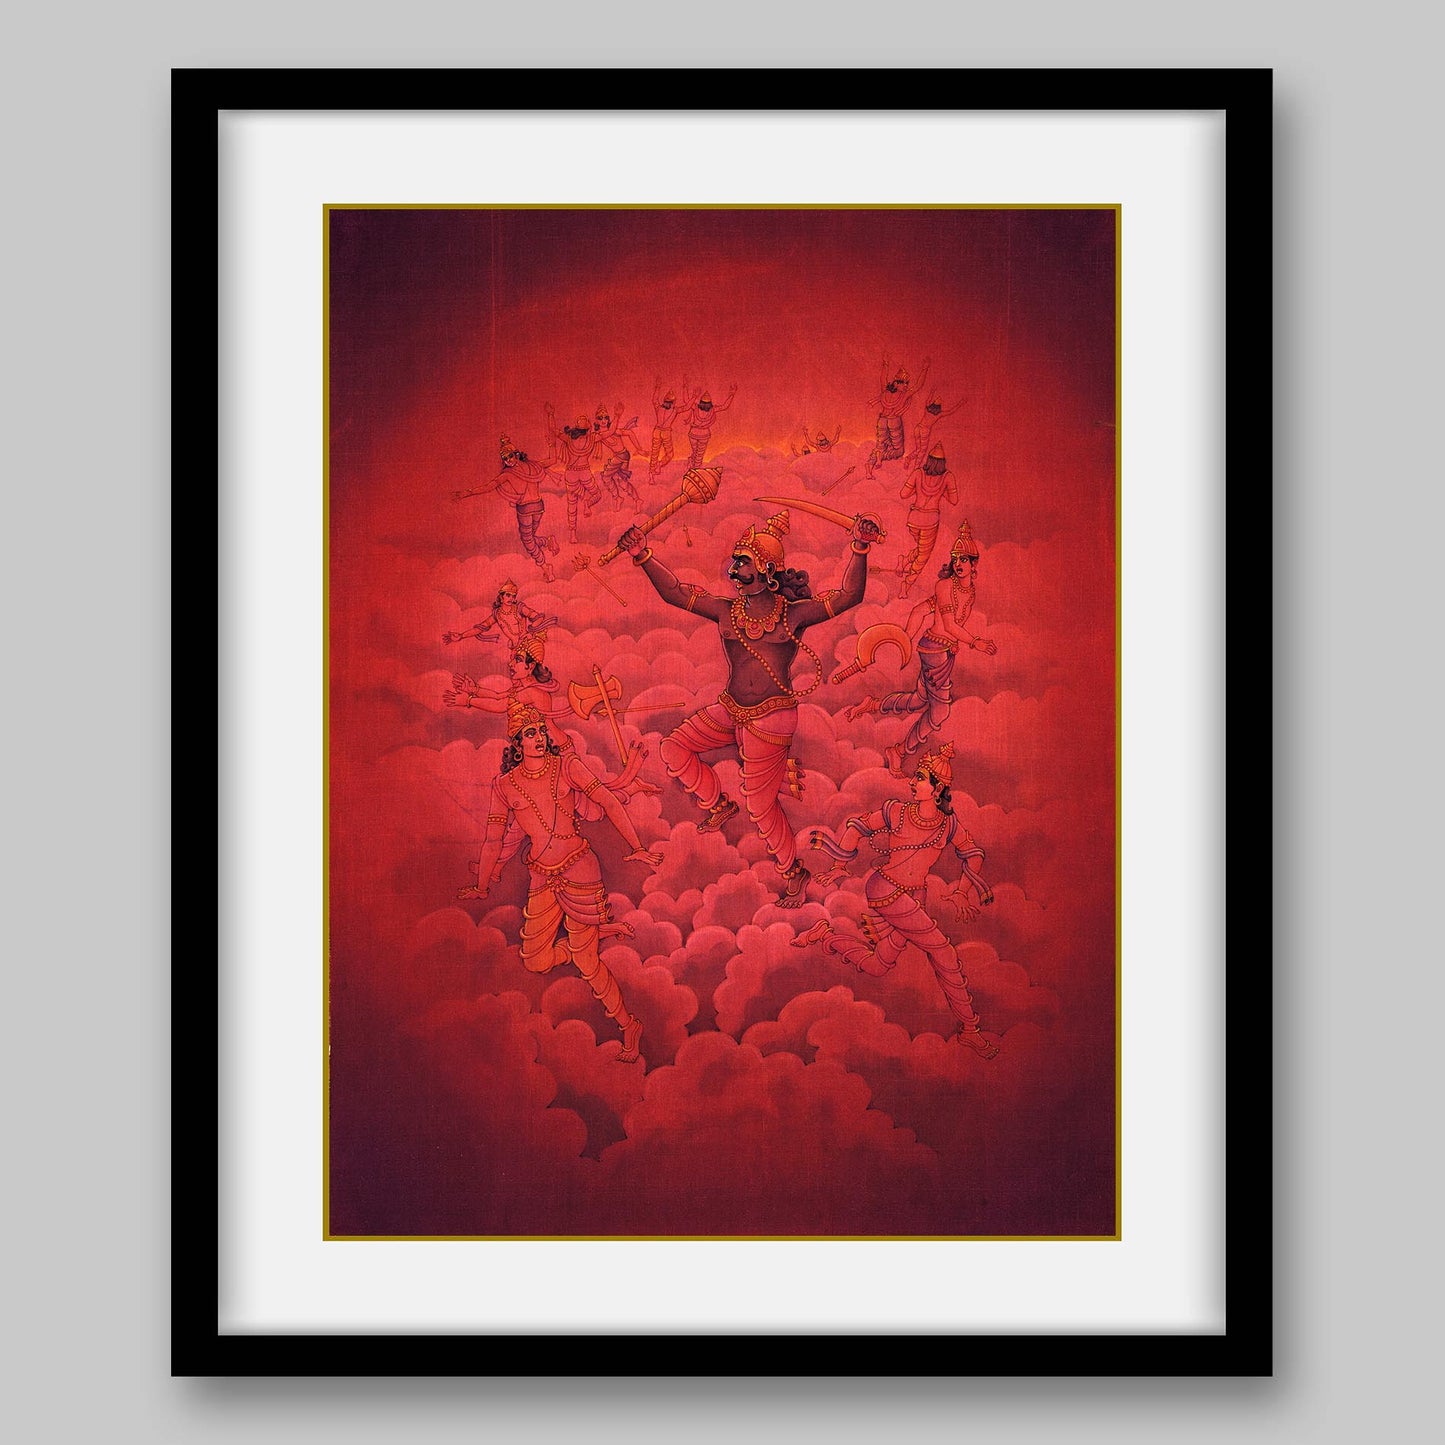 Bali, the king of Asuras – High Quality Print of Artwork by Pieter Weltevrede